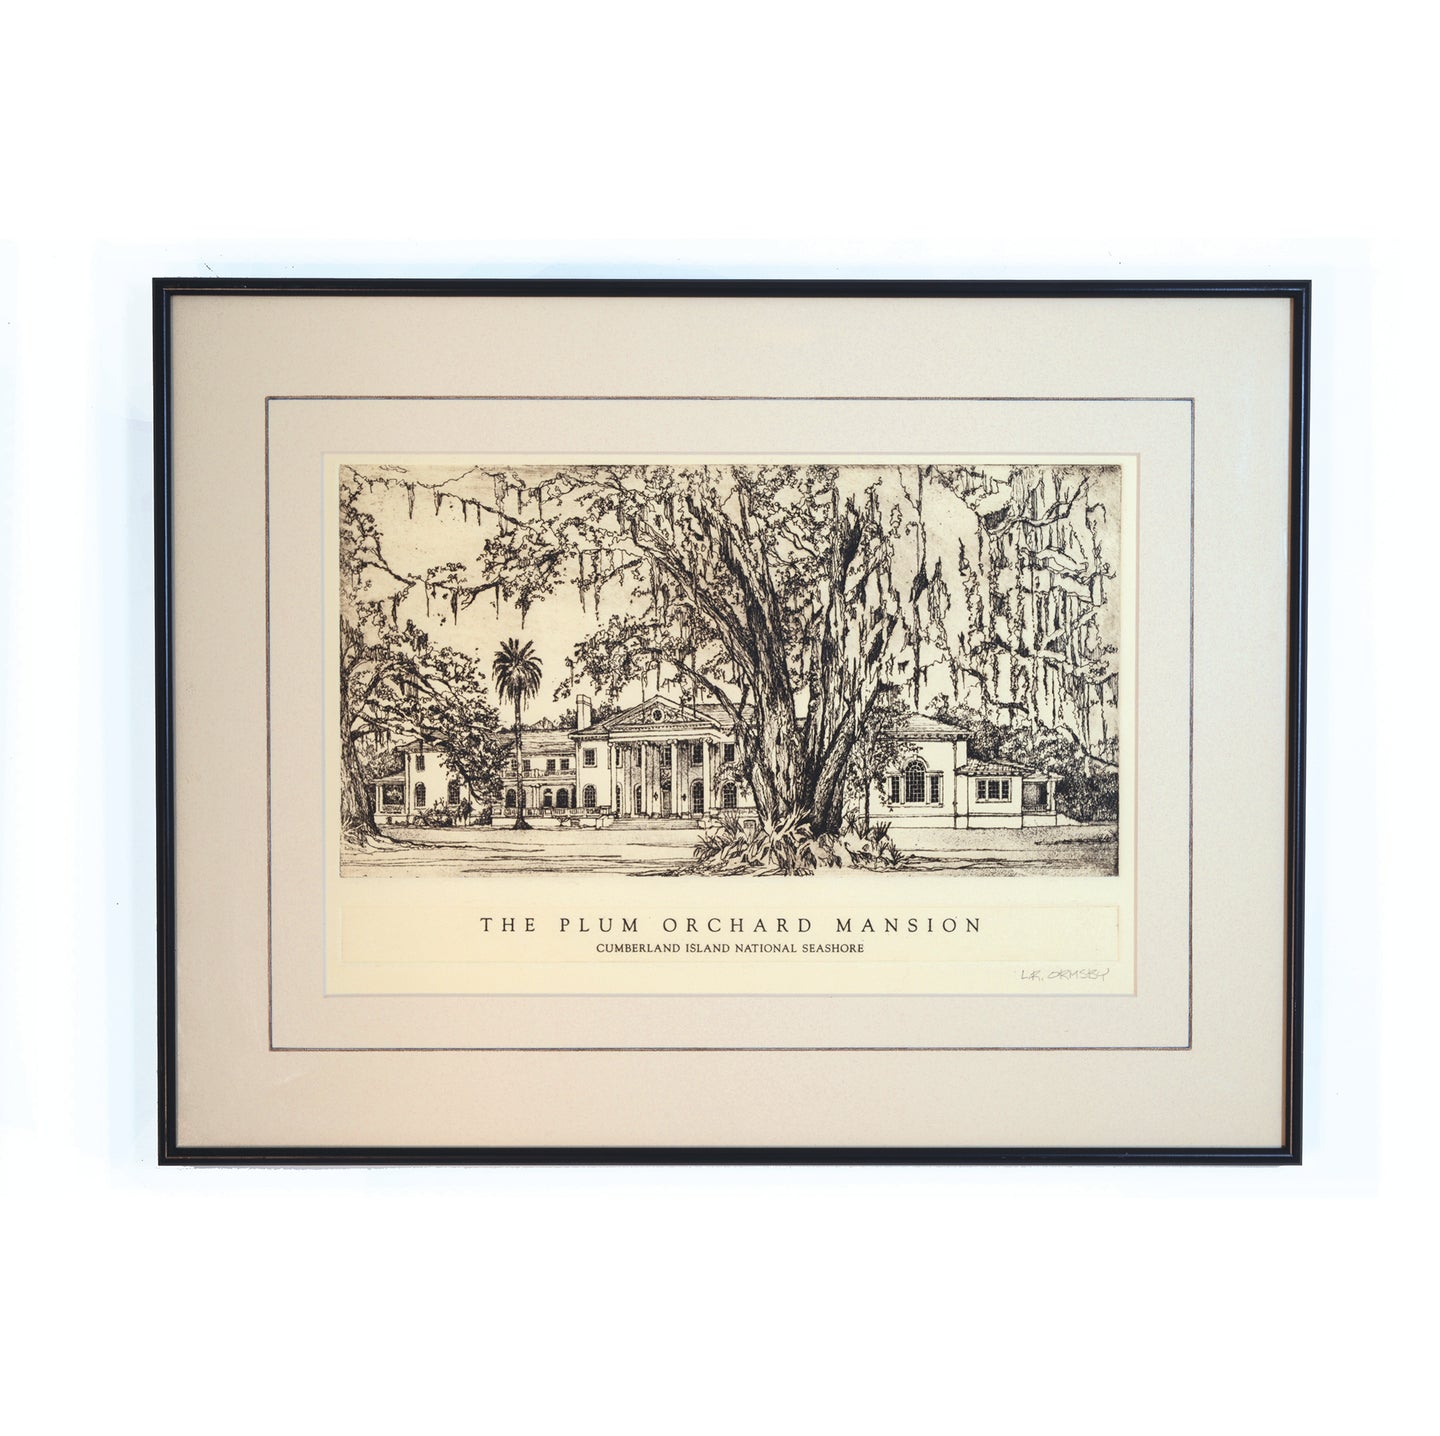 Plum Orchard Mansion etching